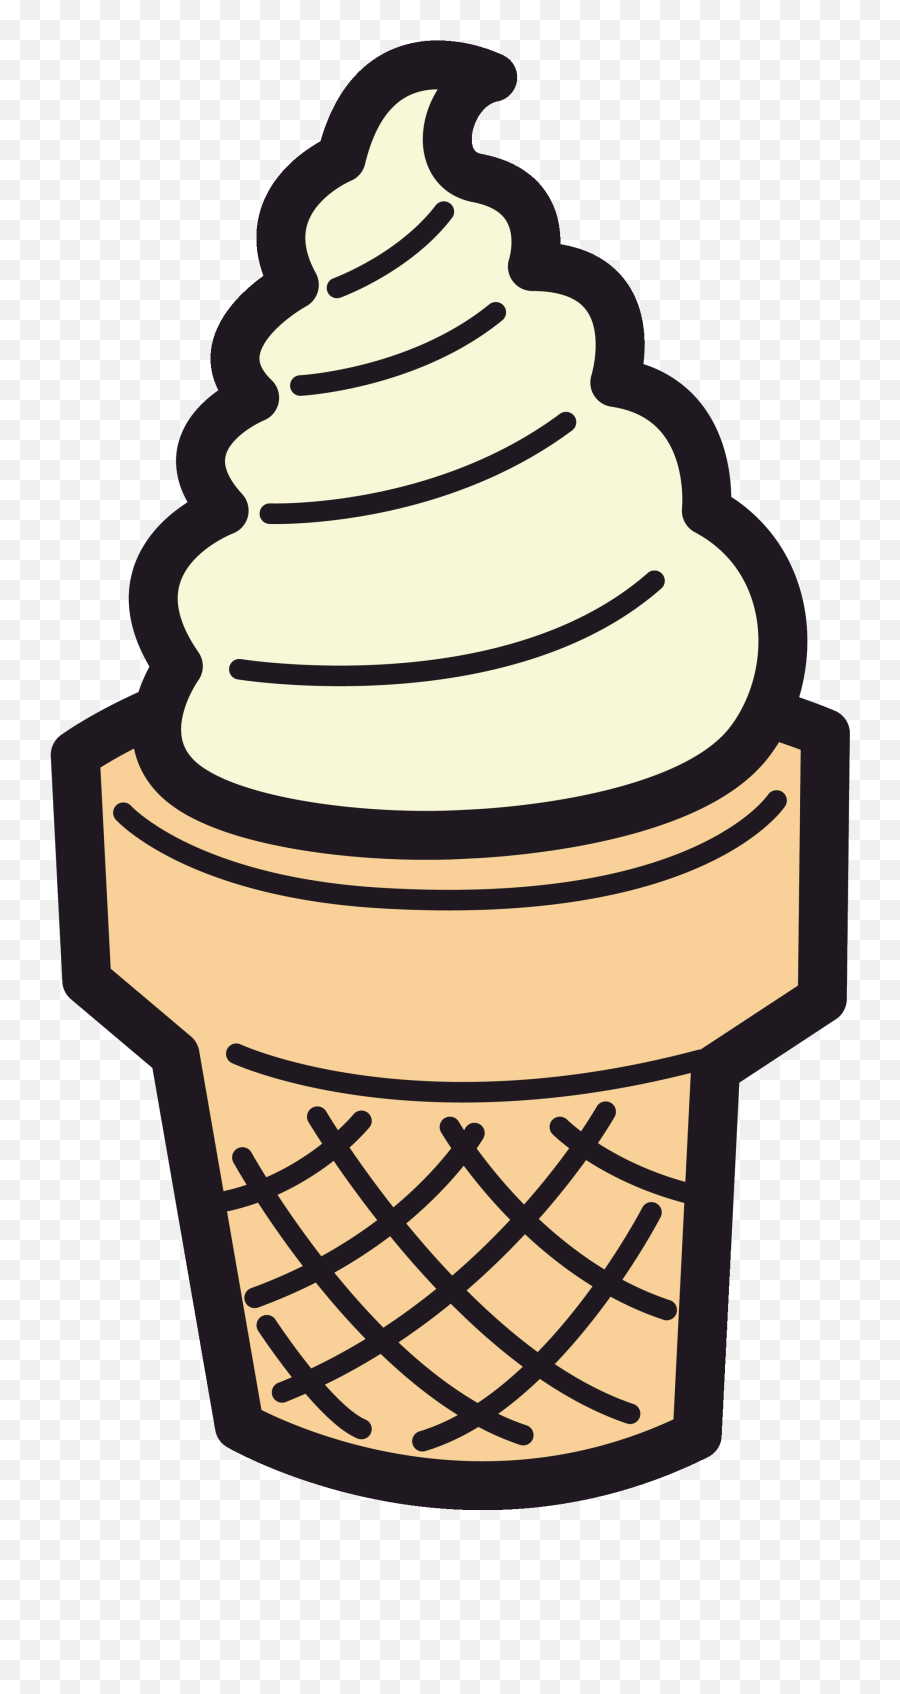 Ice Cream Cone Clipart Free Images 4 - Googly Eyes Ice Cream Emoji,Ice Cream Sun Emoji